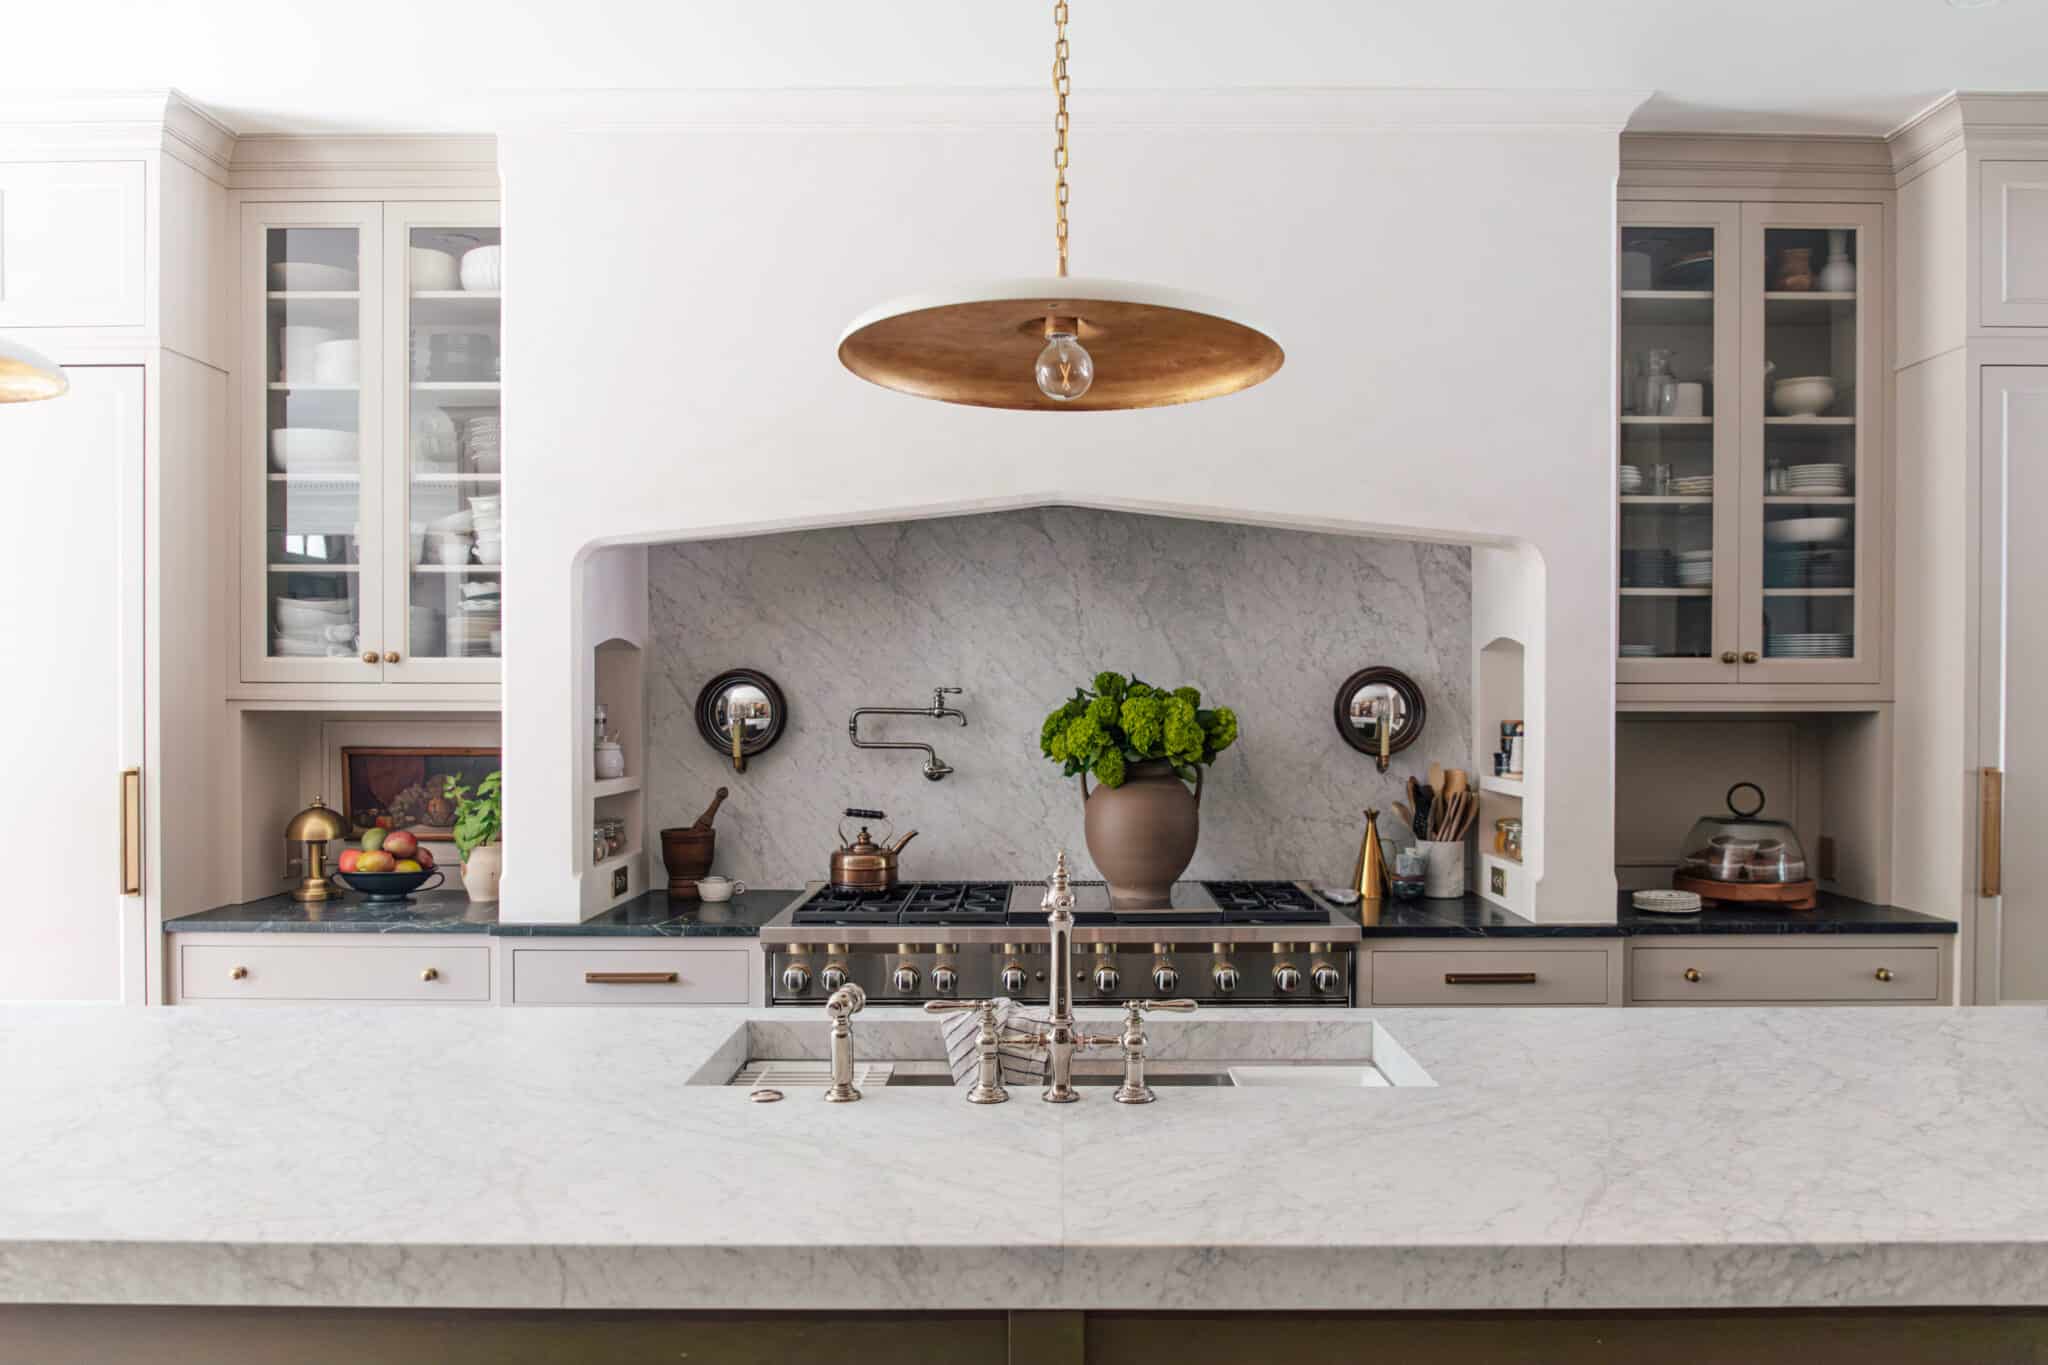 How To Resurface Marble Countertops